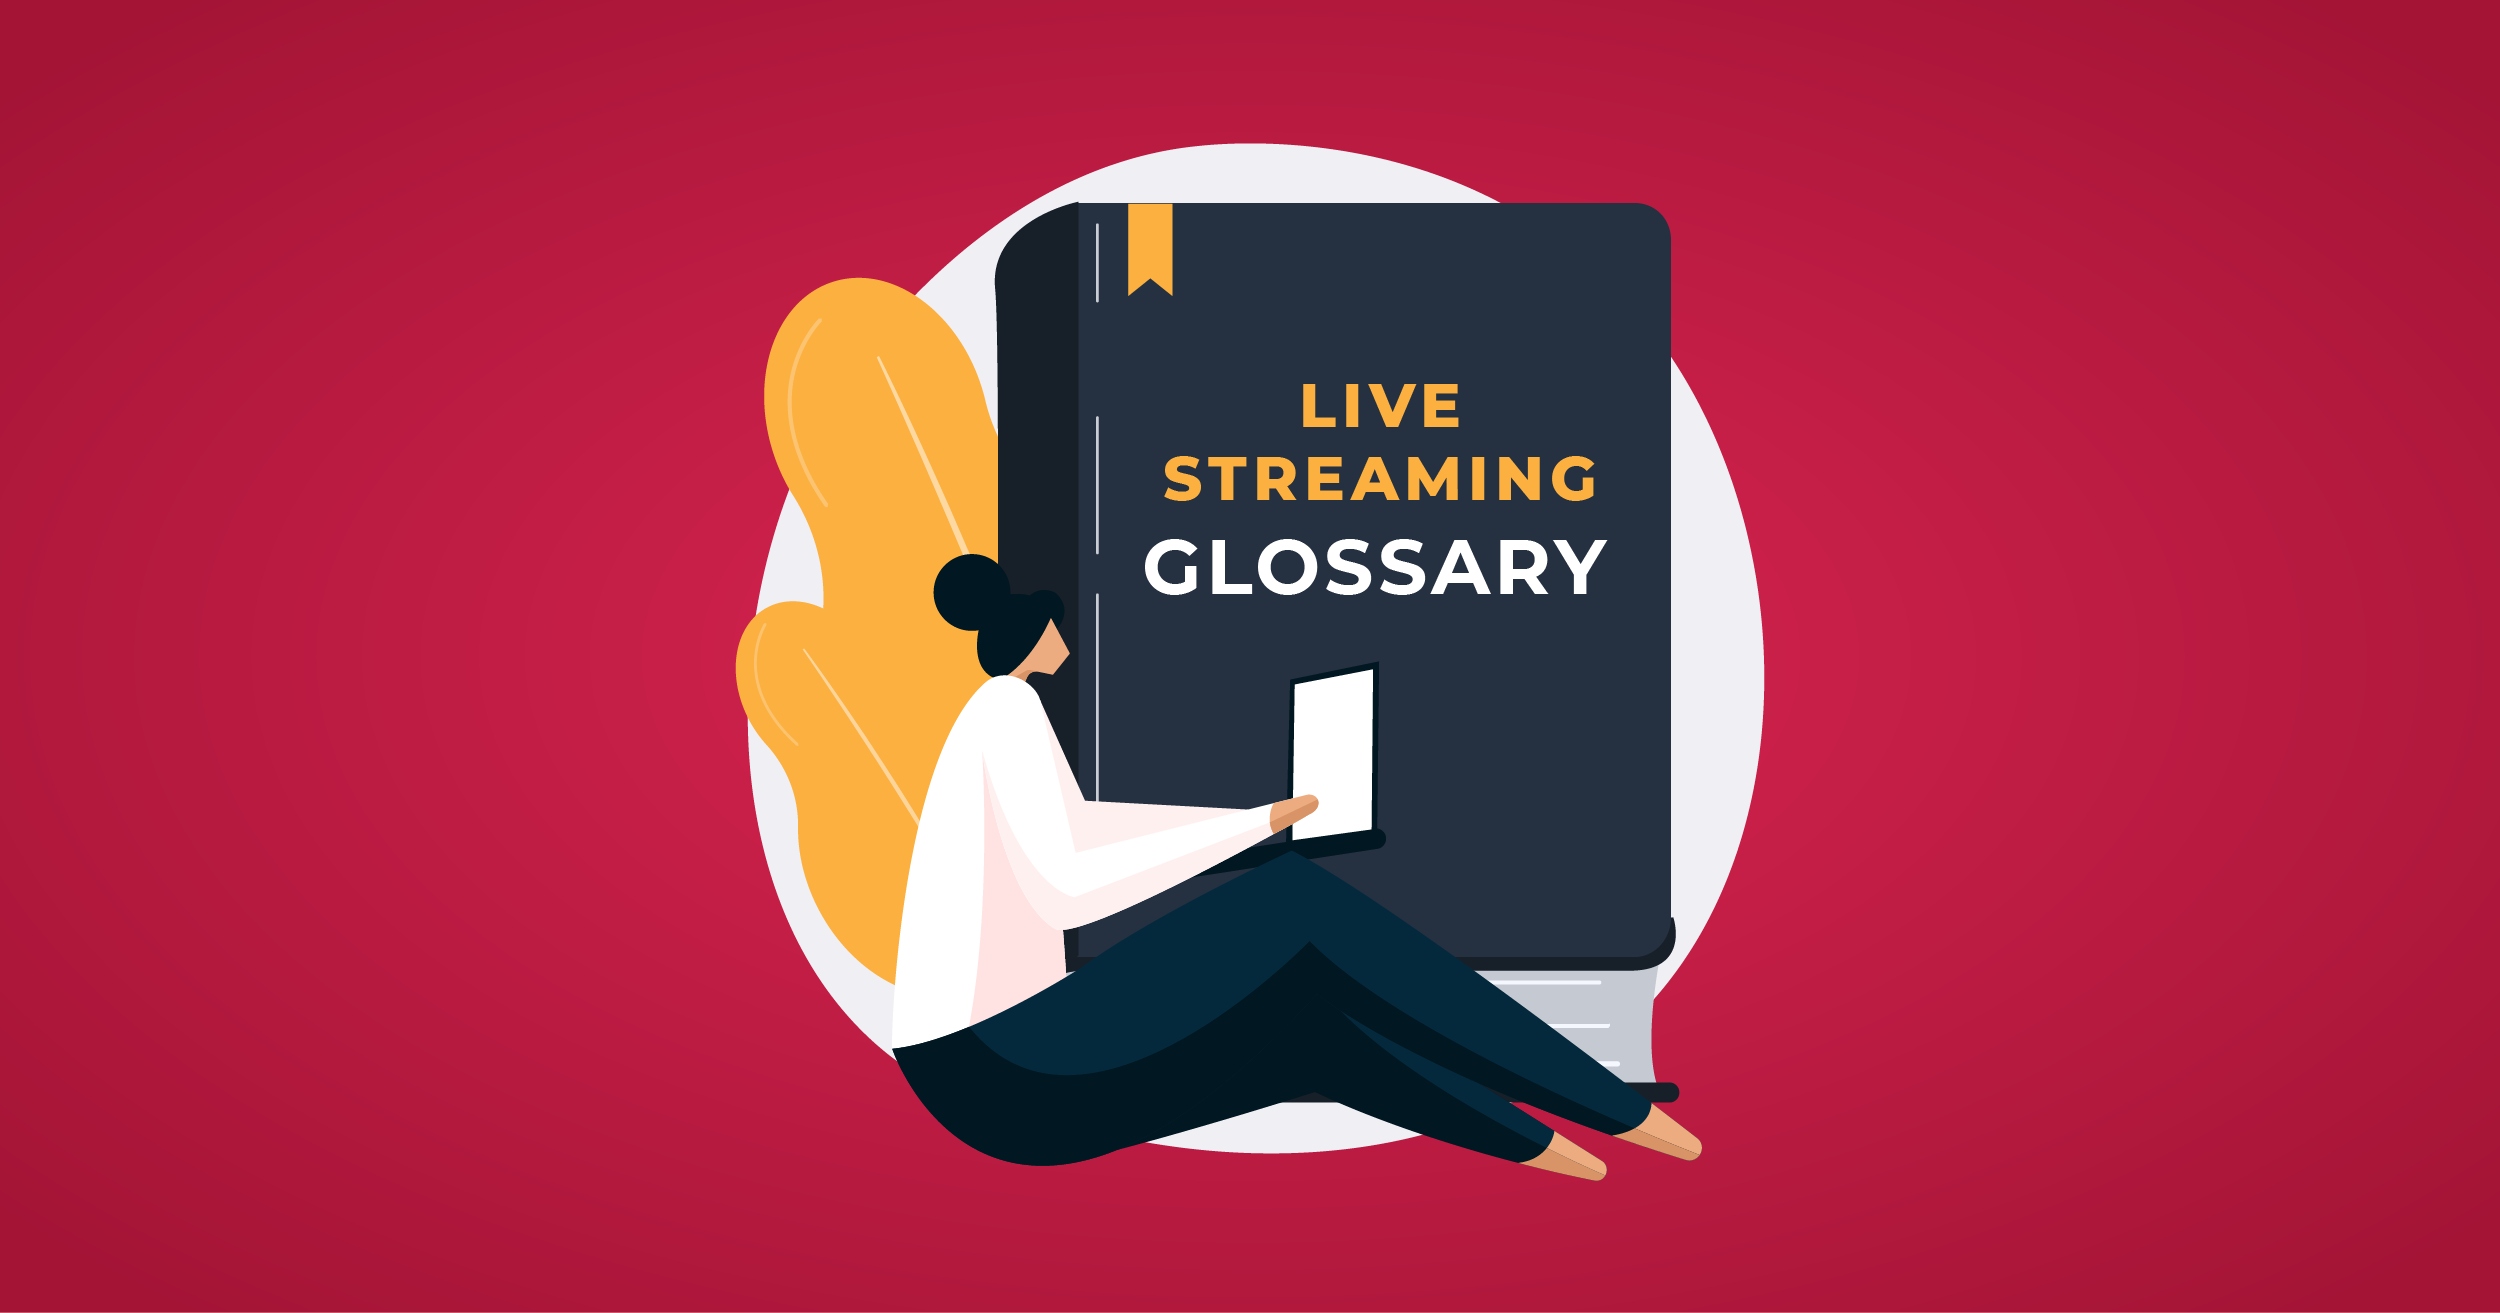 Live Streaming Glossary of Most Common Terms